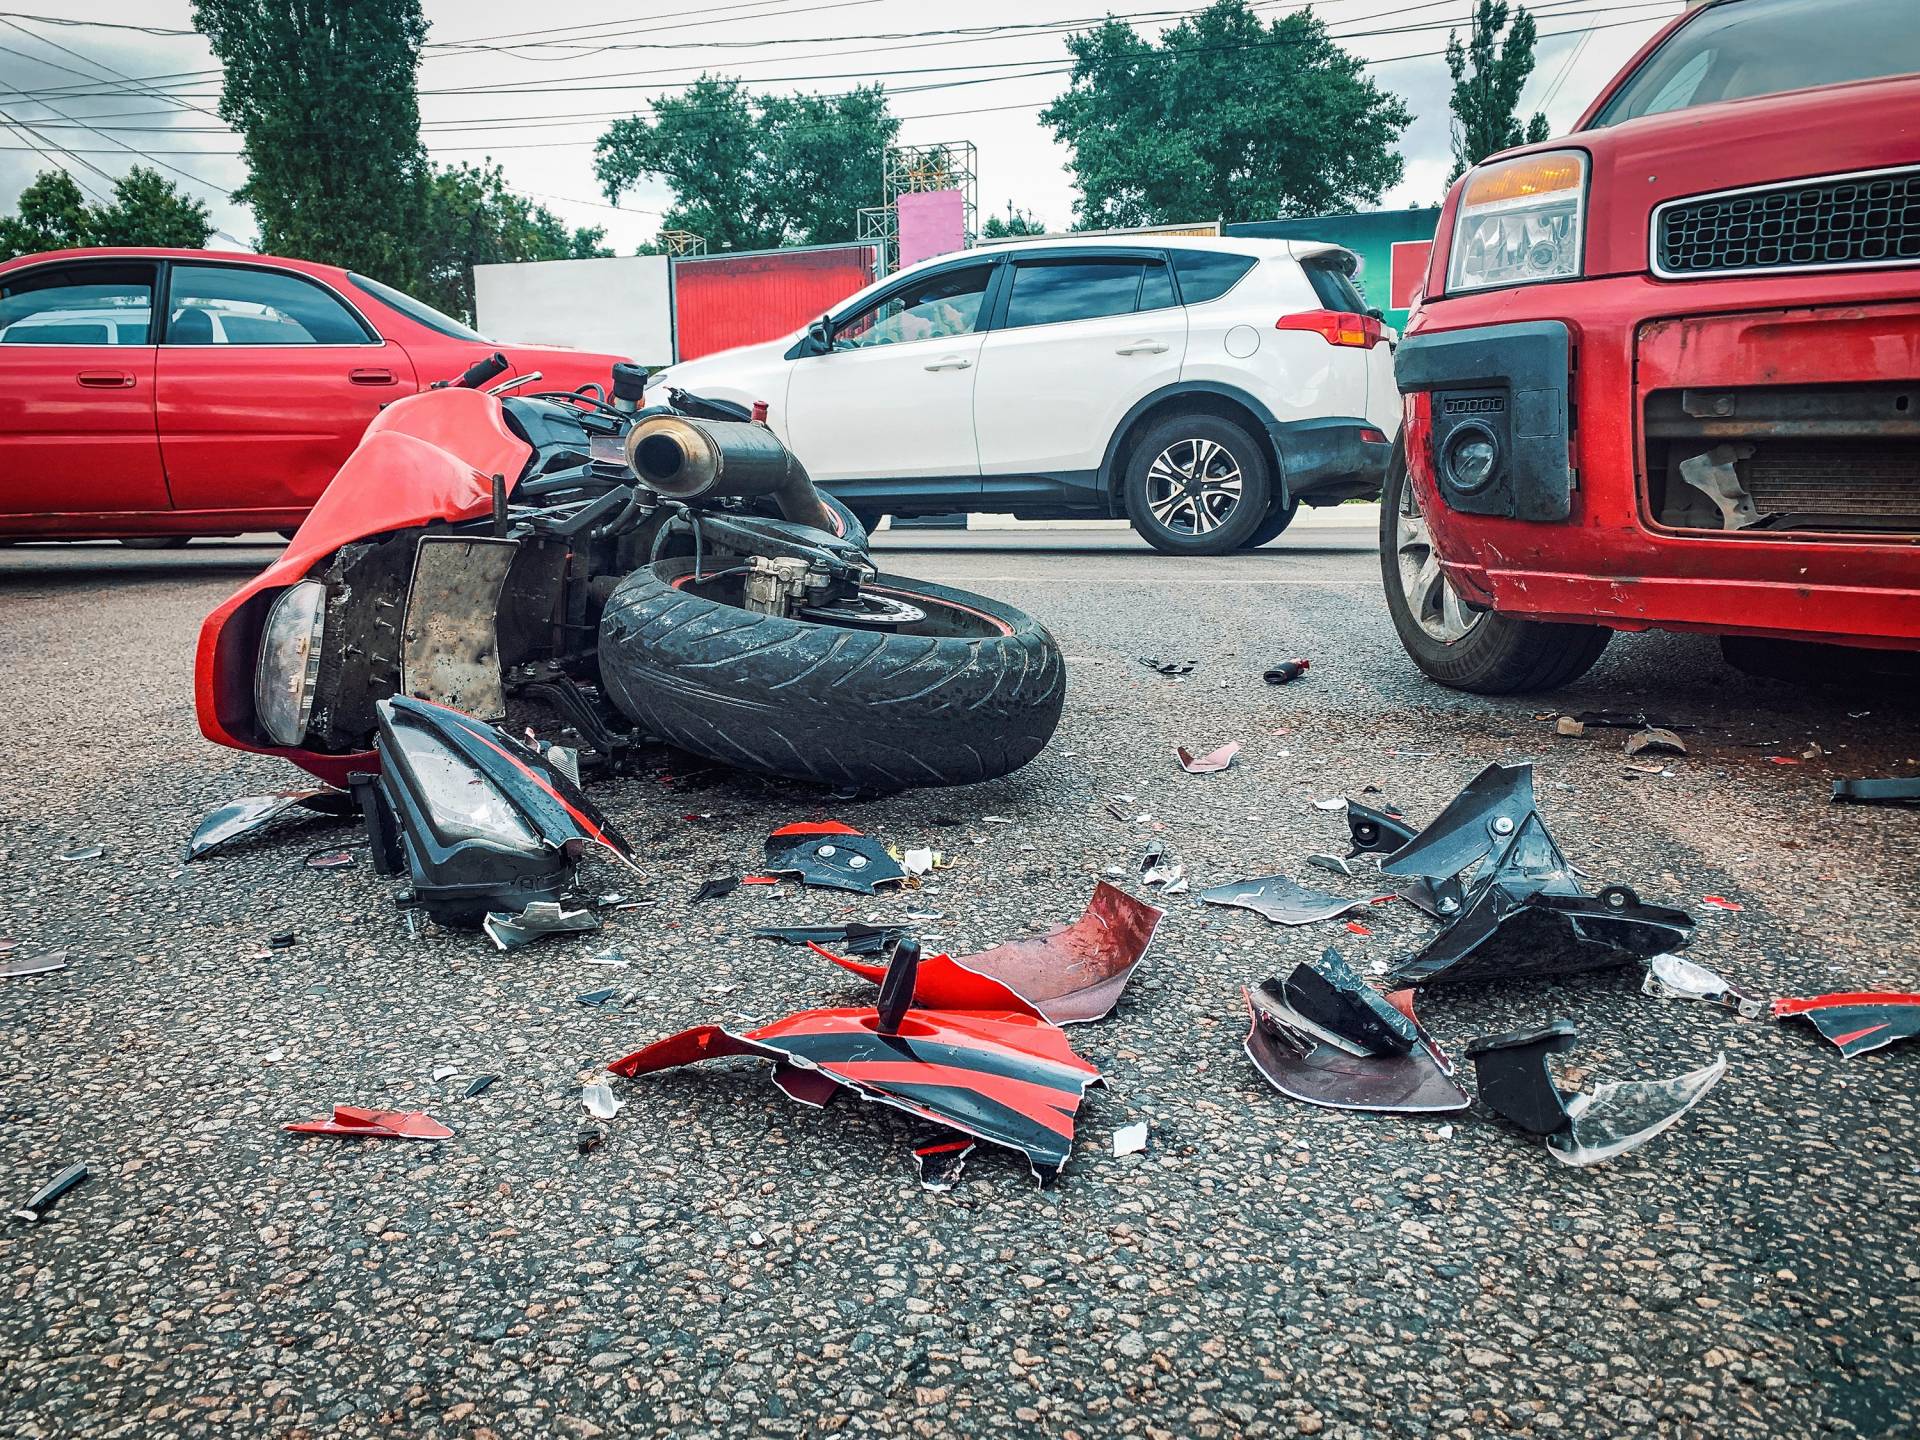 Injured in a motorcycle accident in Atlanta? contact us today!